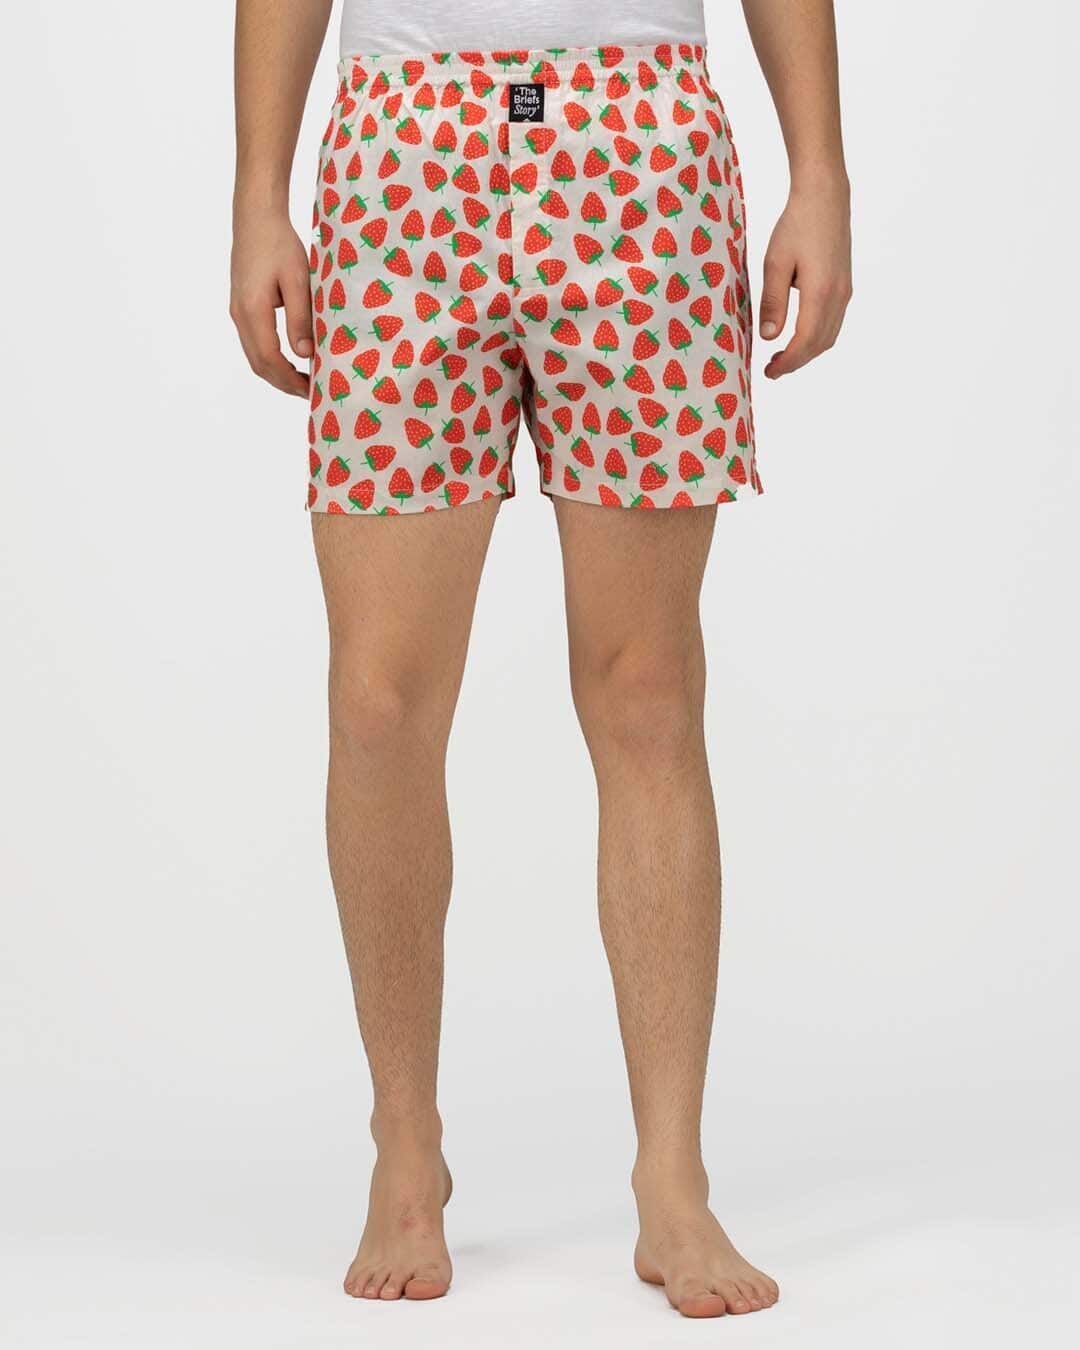 Buy Men's Strawberry Comfy Cotton Boxer Shorts Online in India at Bewakoof